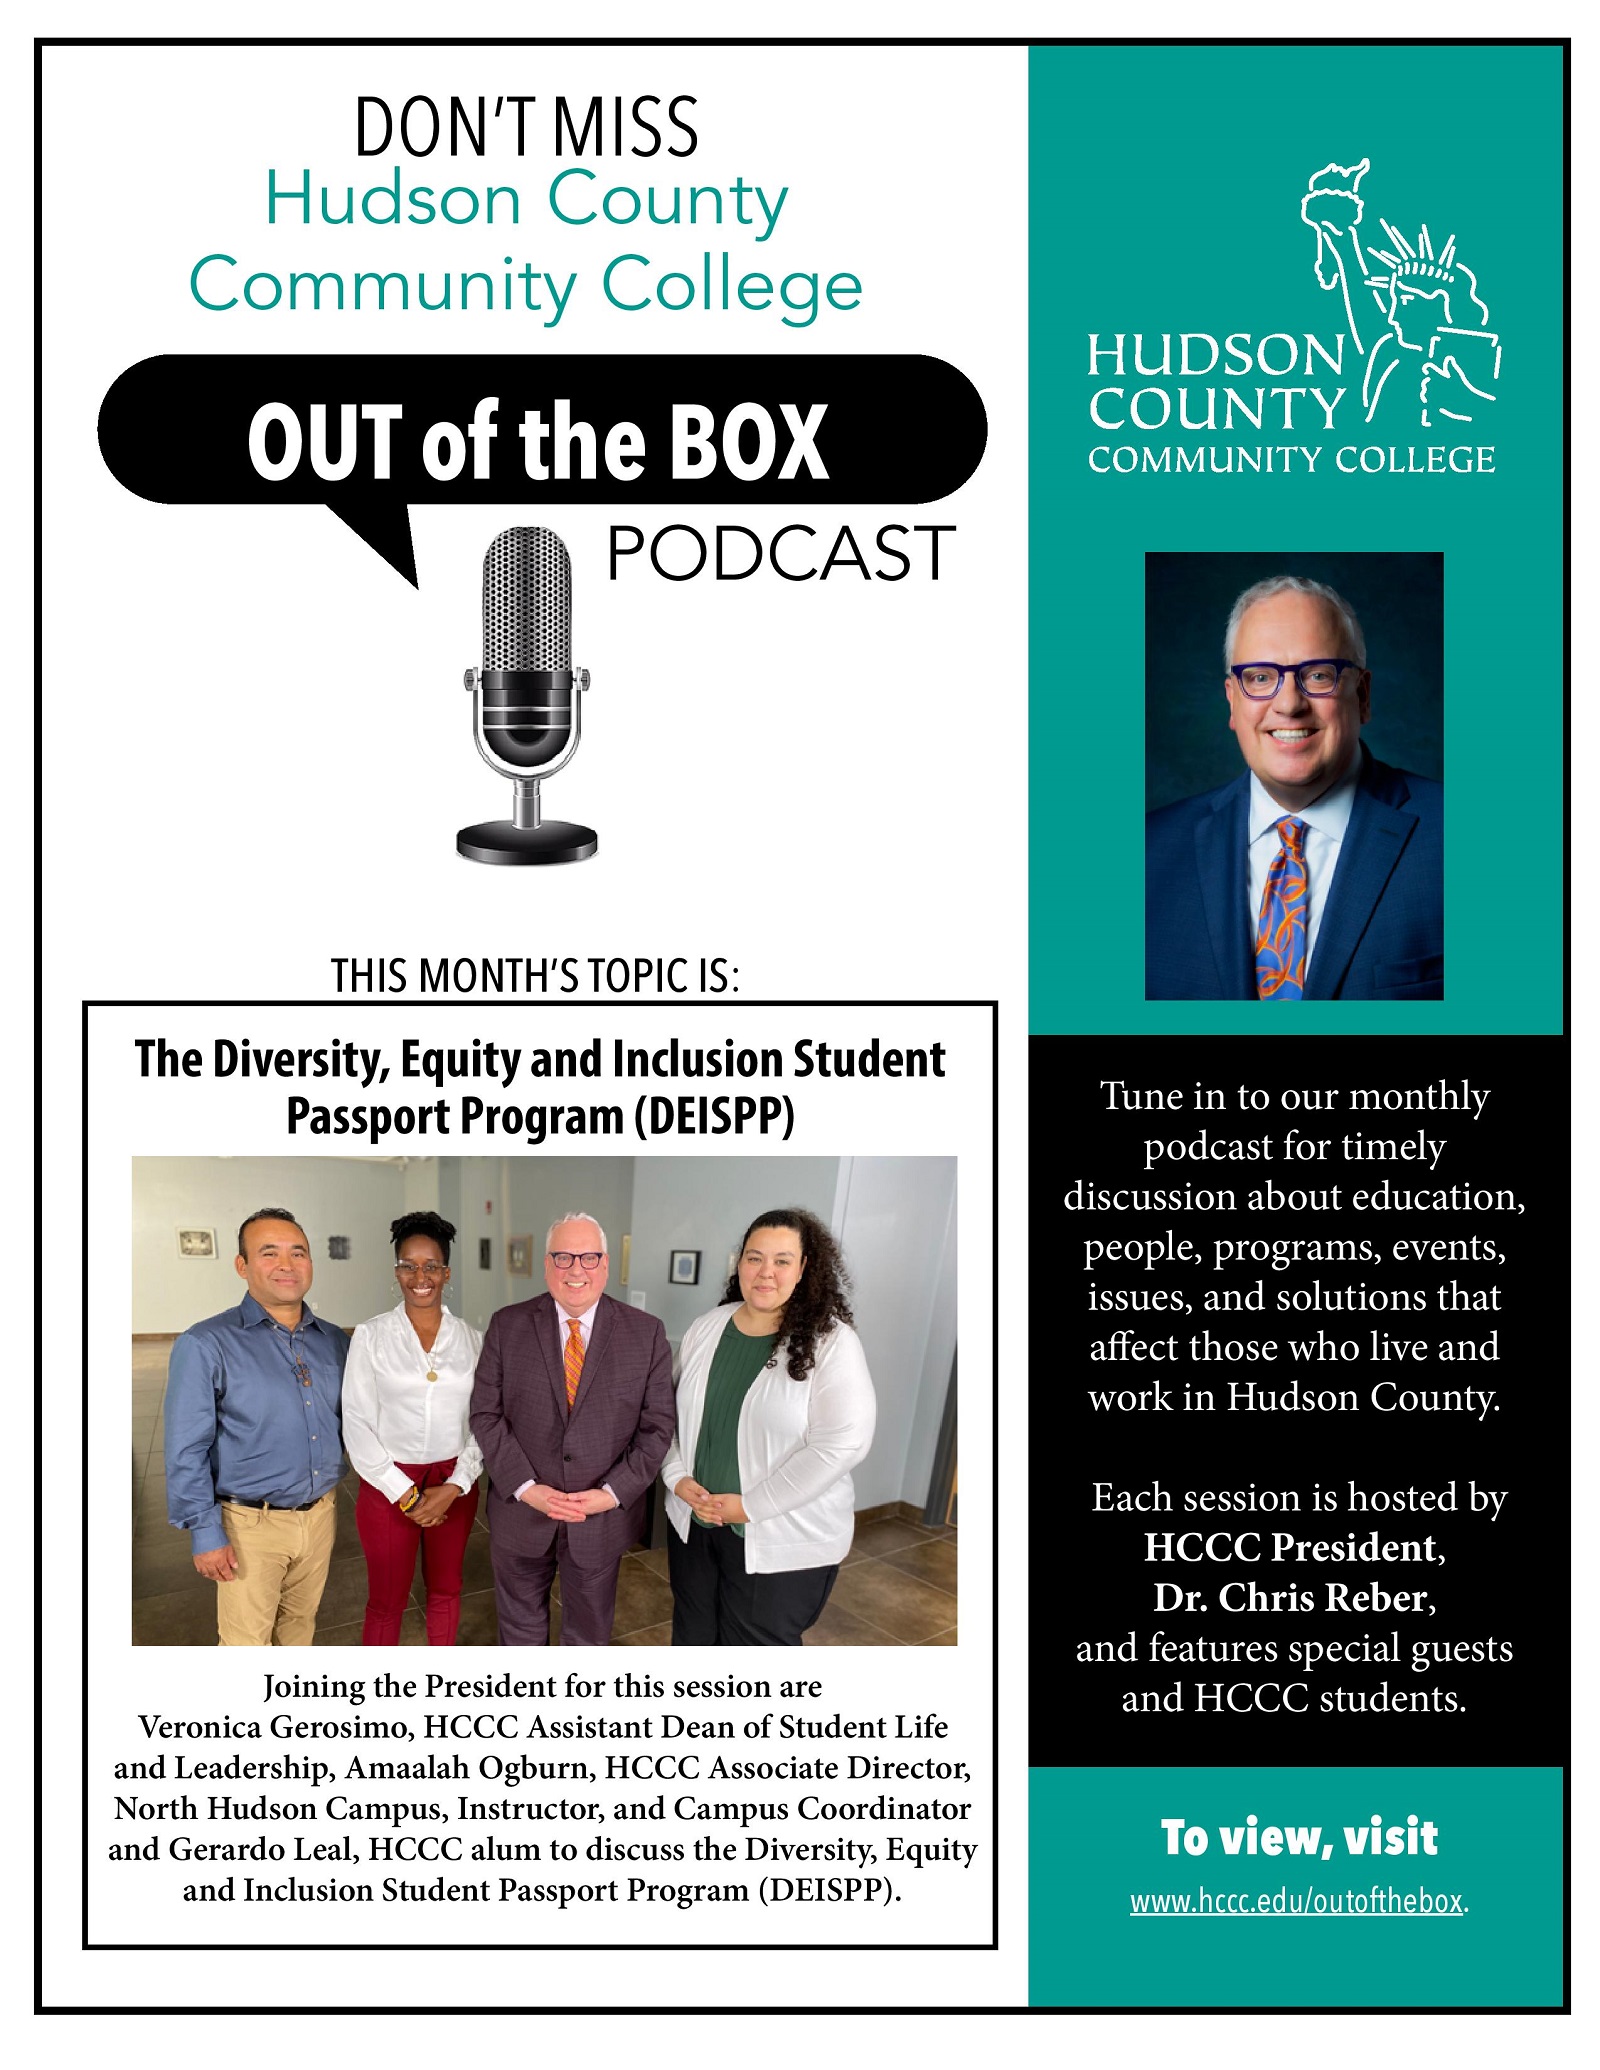 HCCC Out of the Box - The Diversity, Equity and Inclusion Student Passport Program (DEISPP)